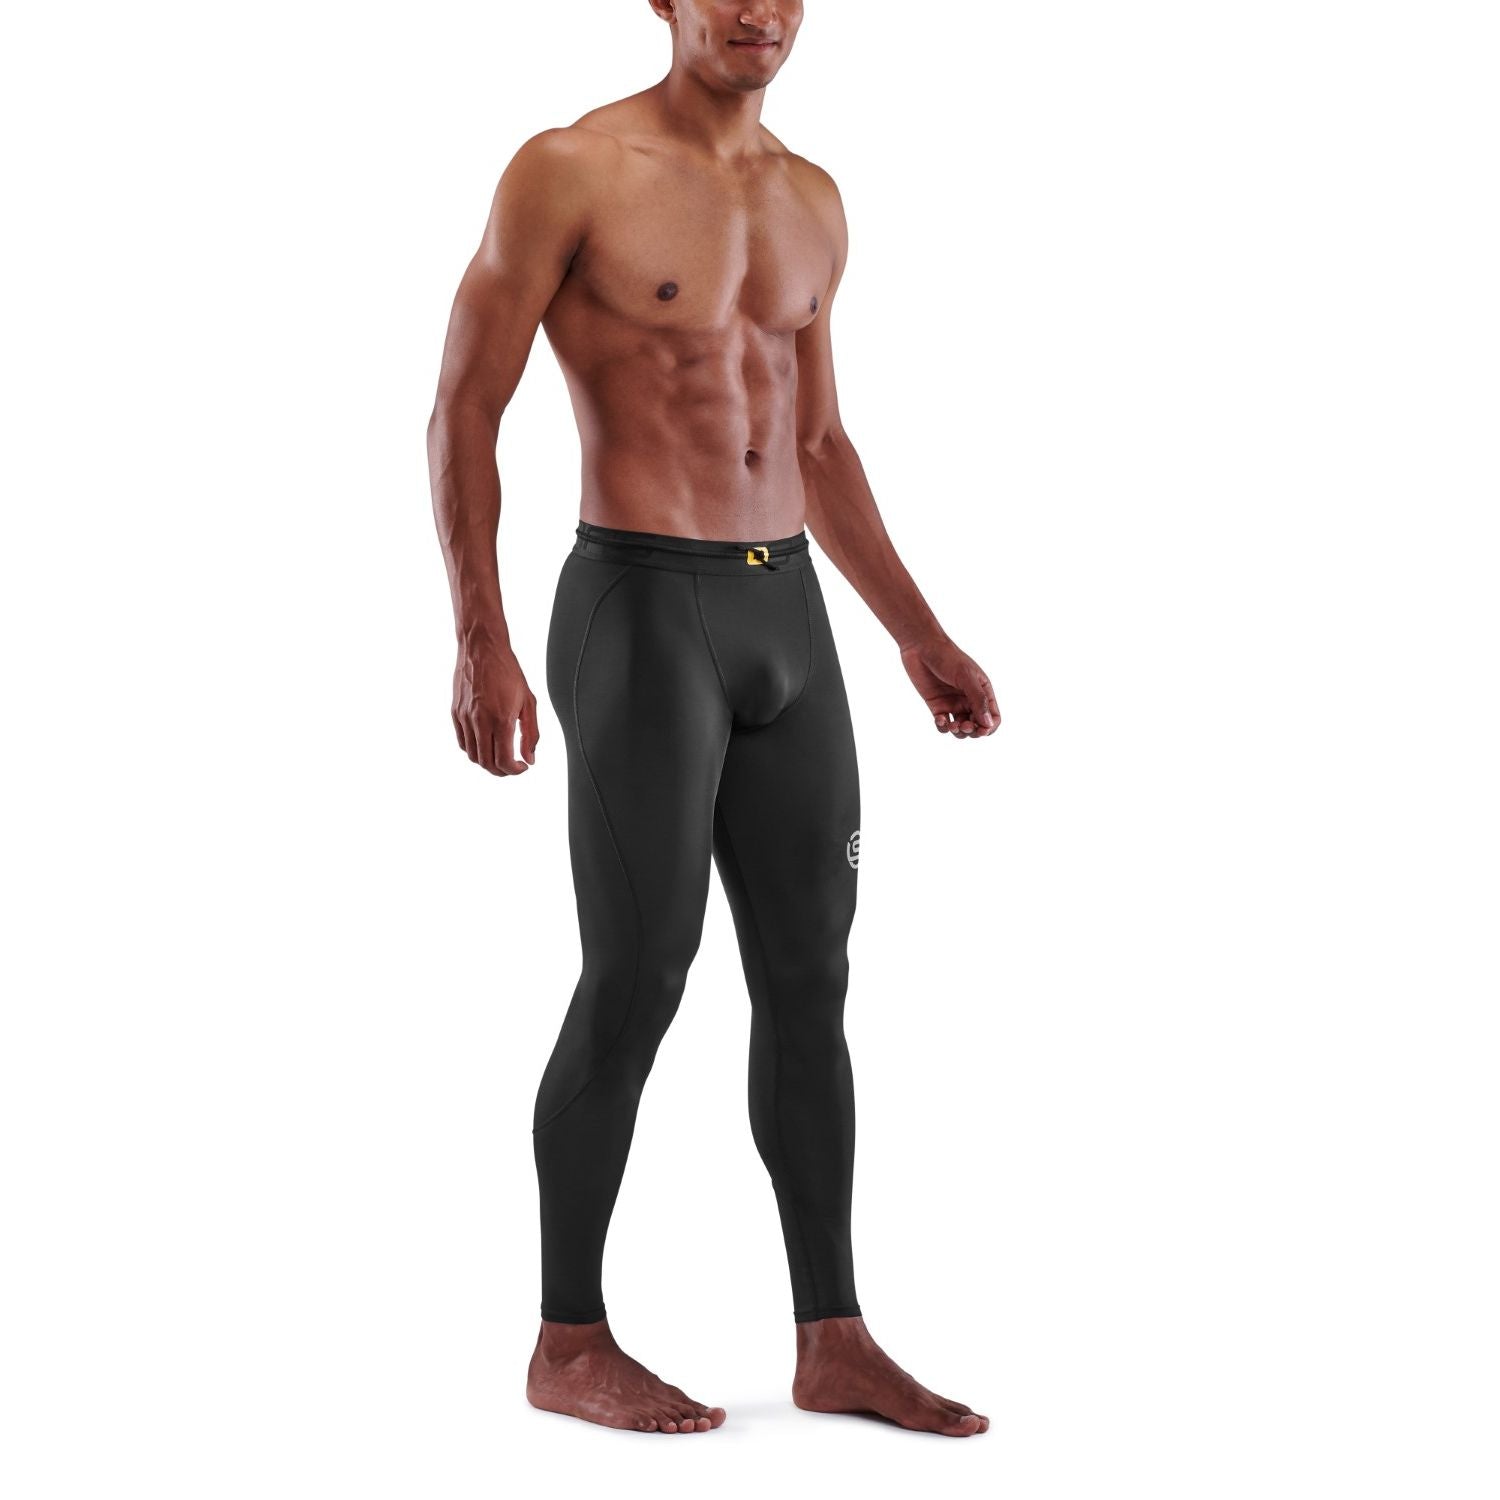 SKINS Men's Series-3 Travel & Recovery Long Tights - Black